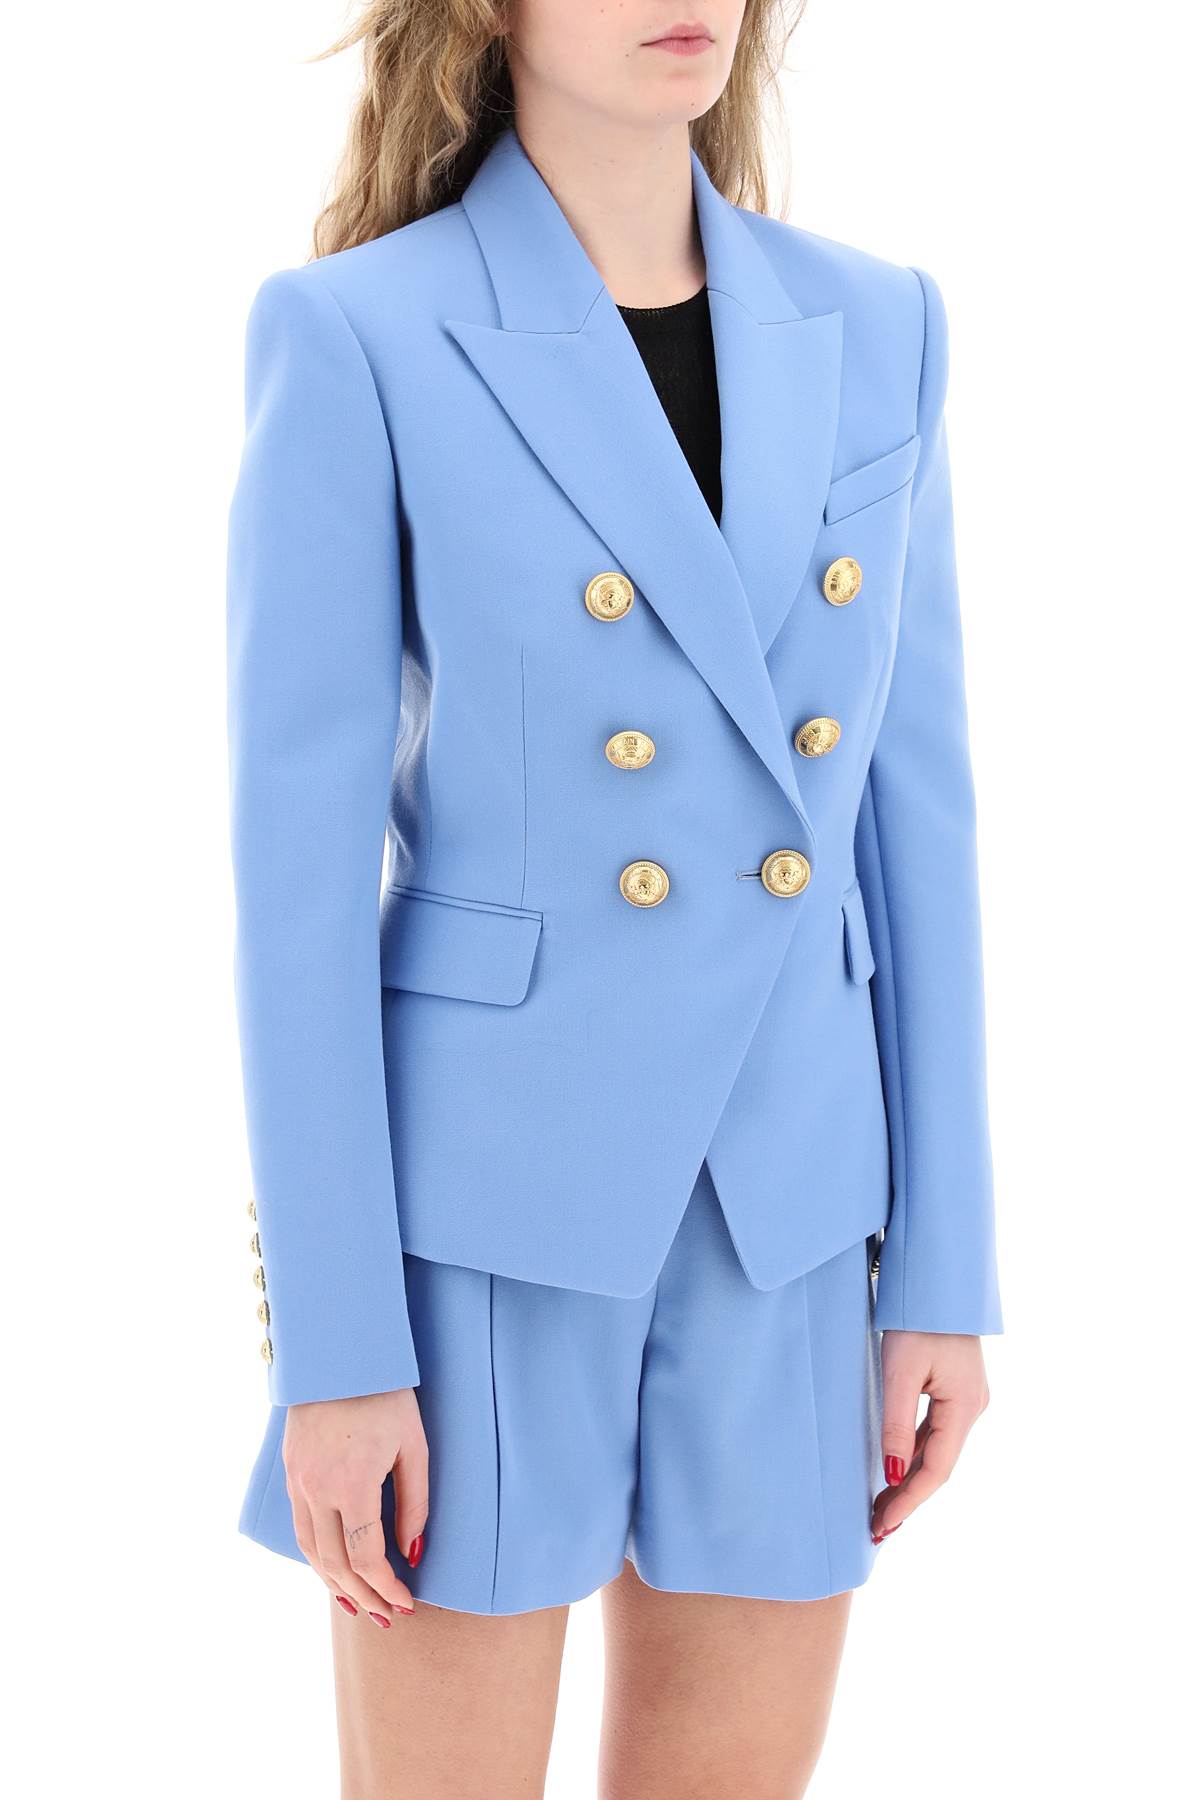 BALMAIN Women's Light Blue Fitted Double-Breasted Jacket for SS24